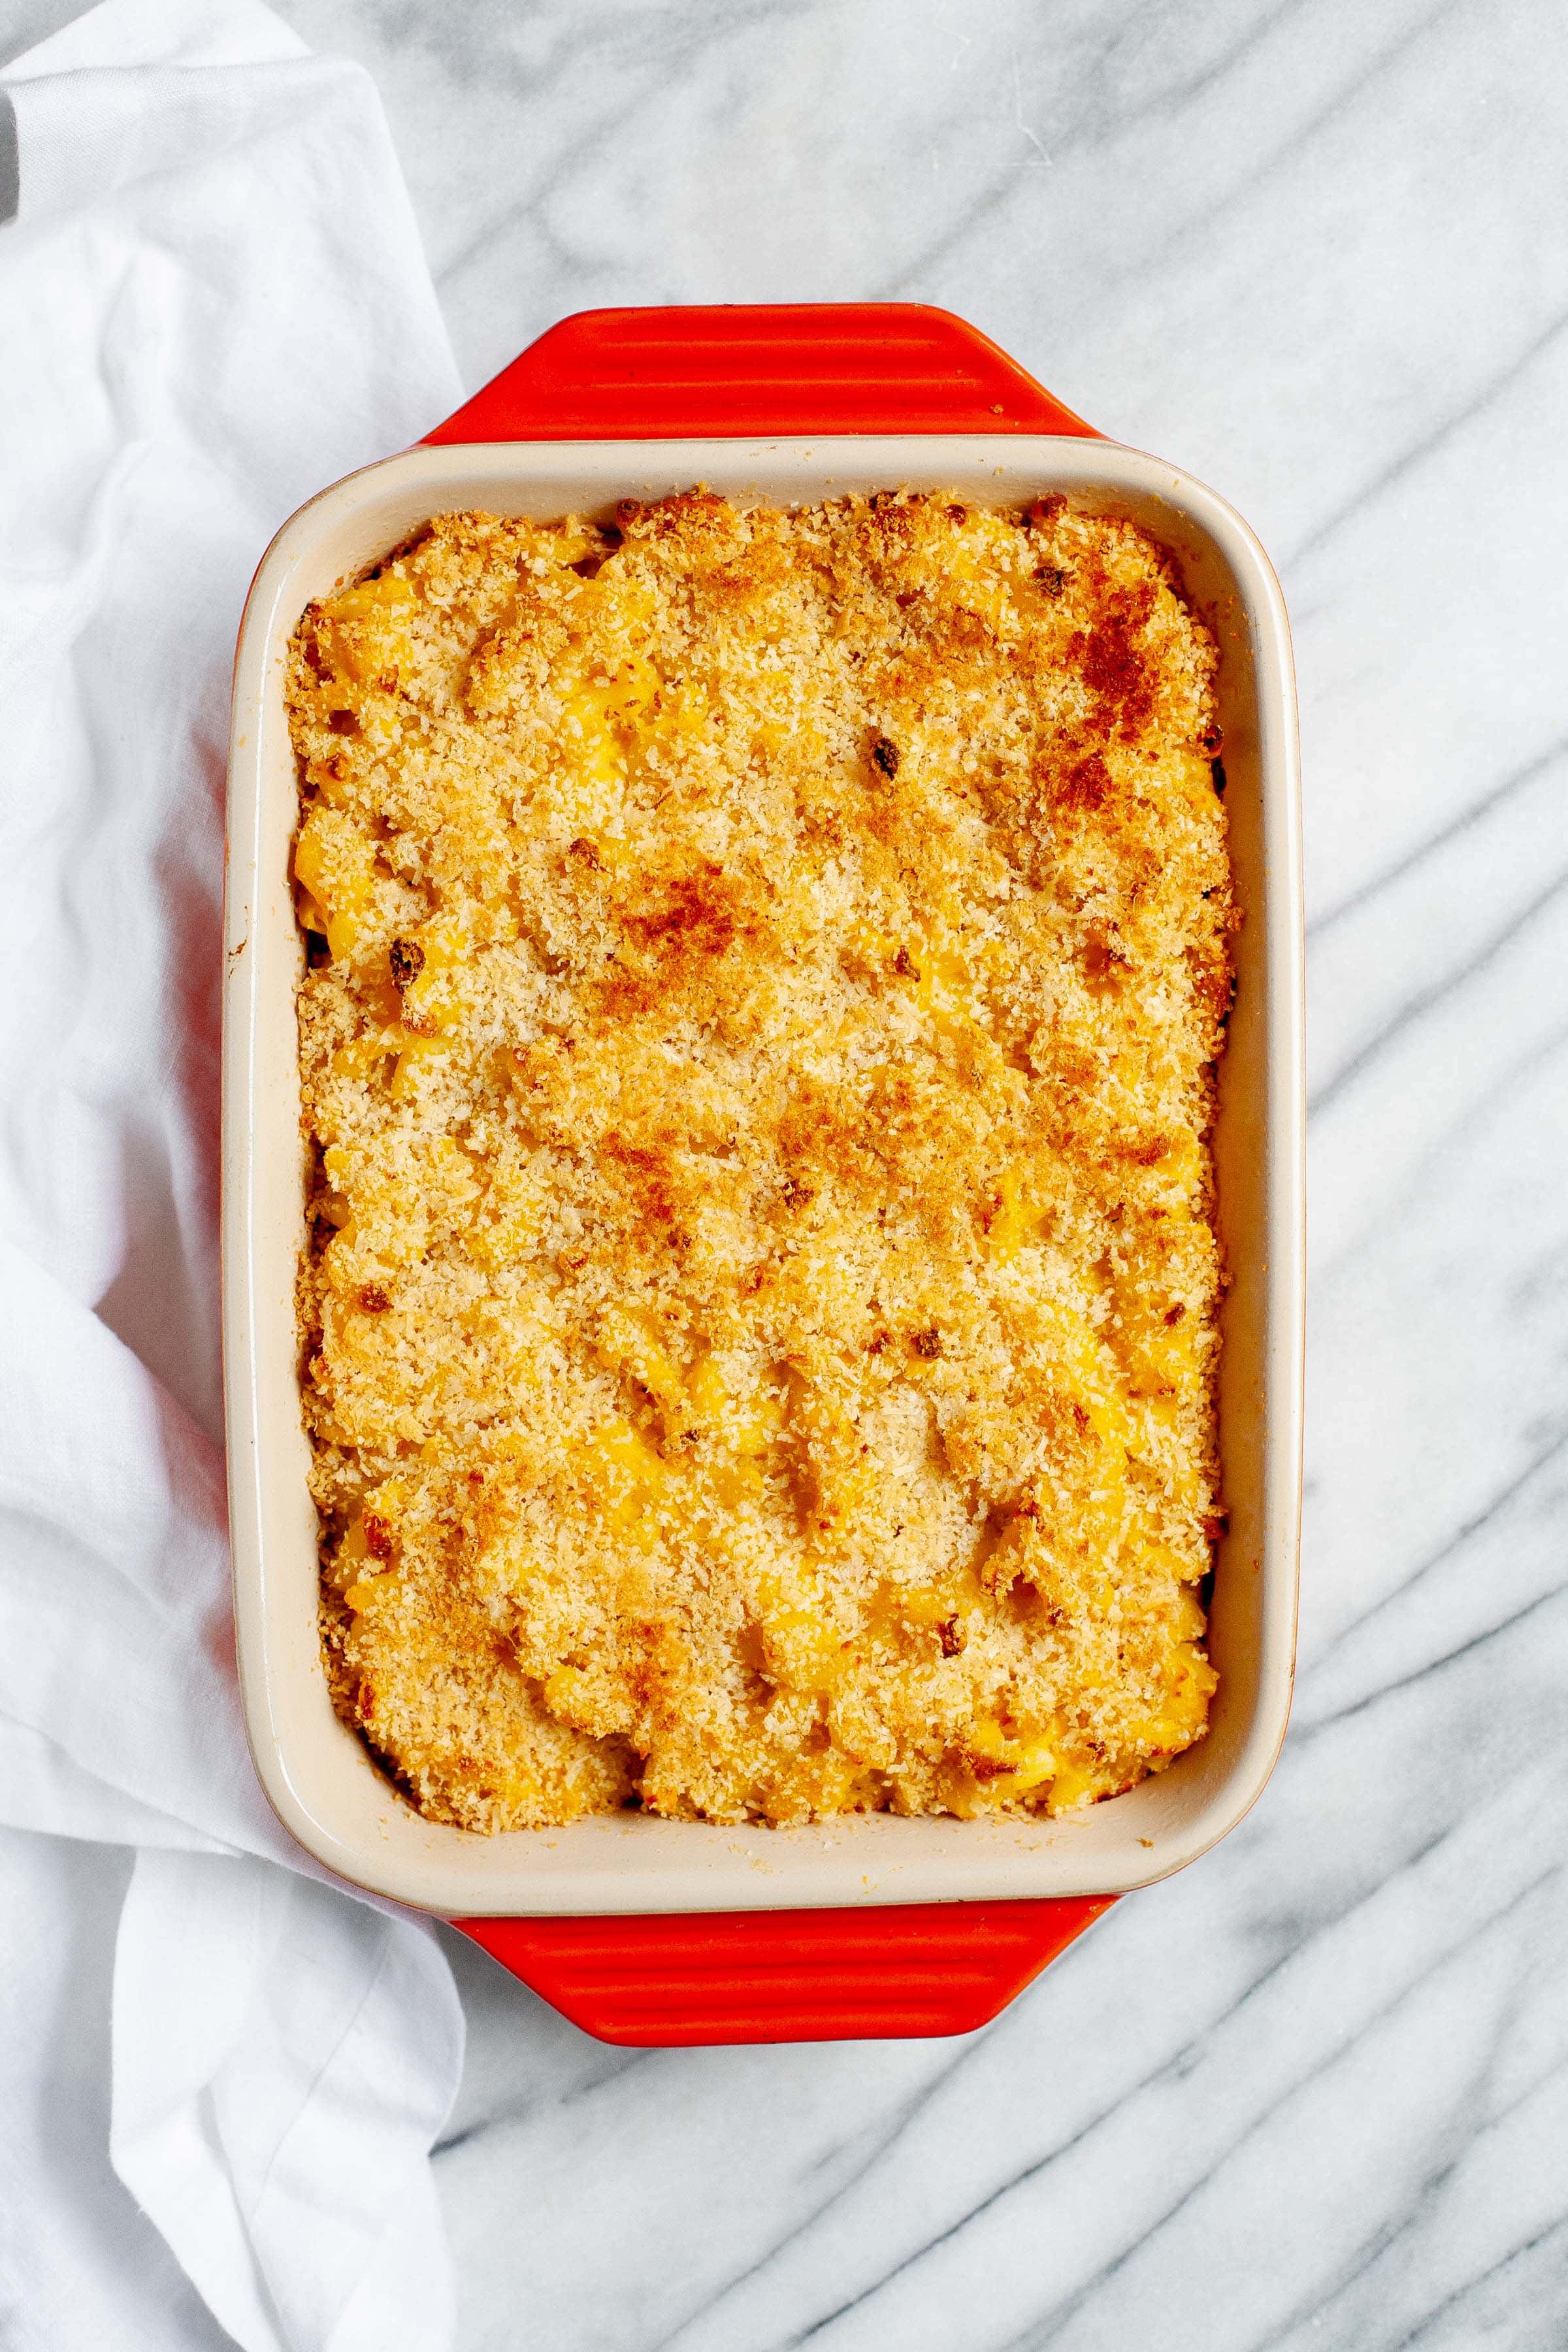 Beer and Butternut Squash Macaroni and Cheese in a red baking pan